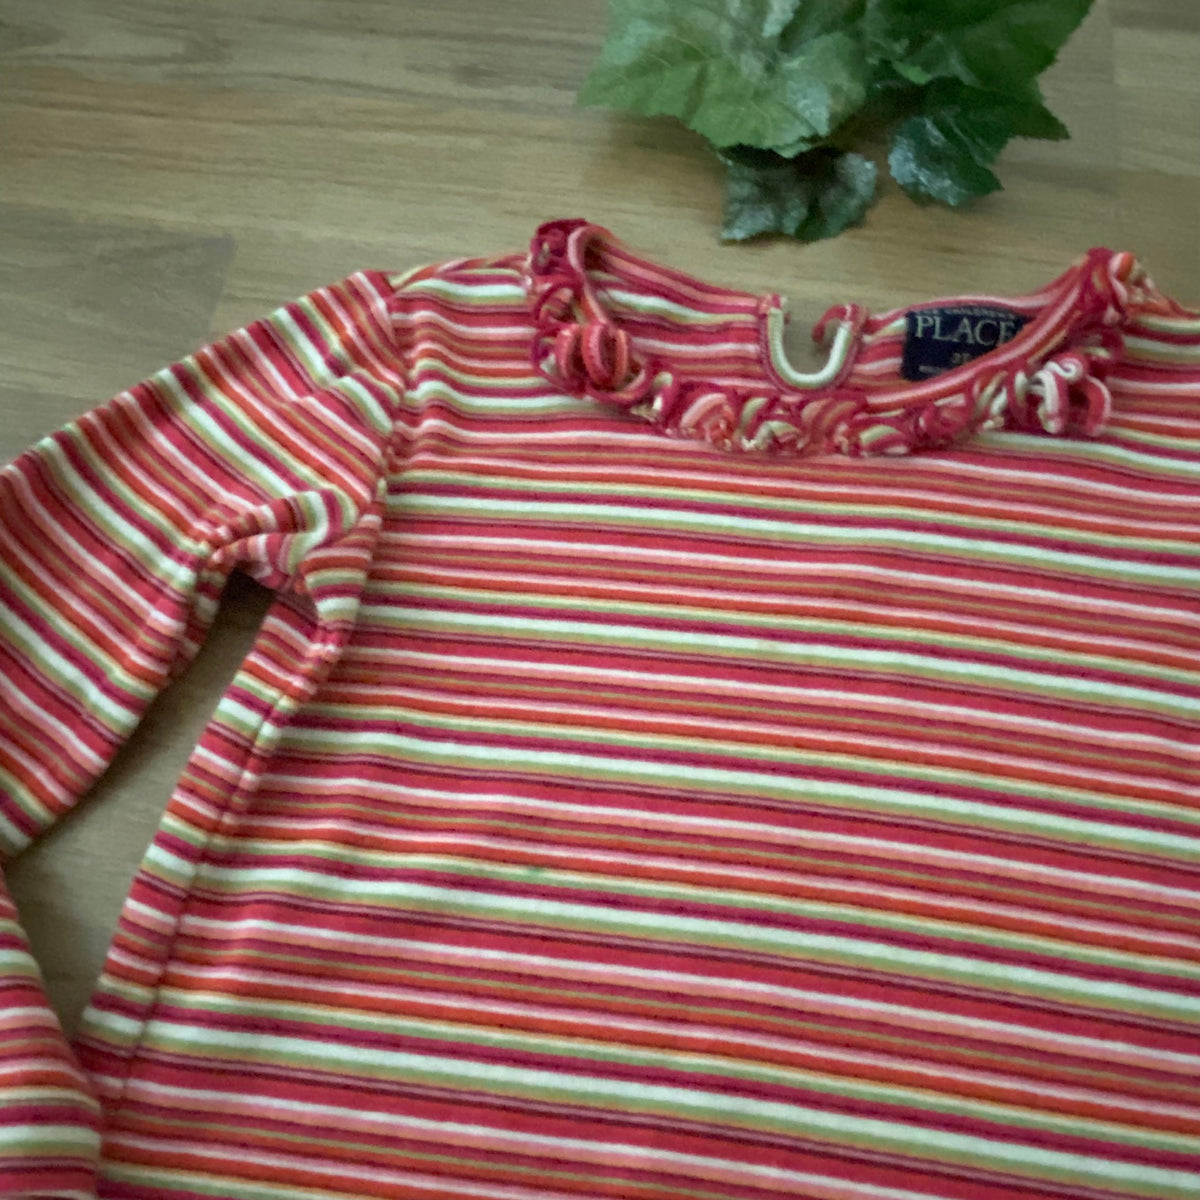 Long Sleeve Striped Top (Girls Size 3)